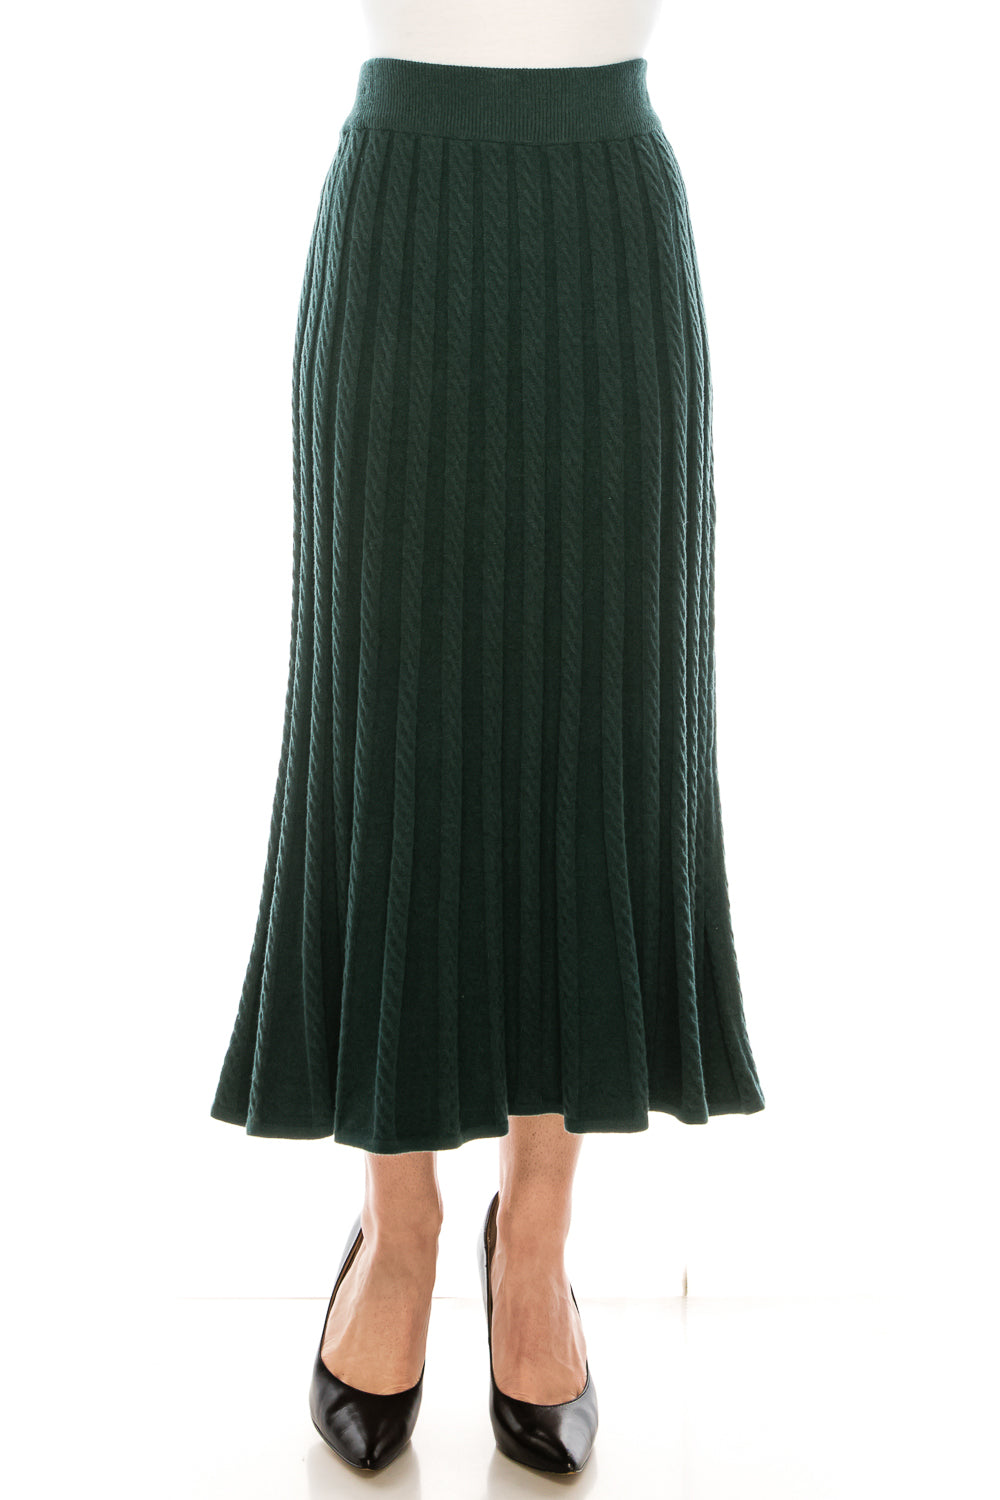 Green Rope Detail A-Line Skirt